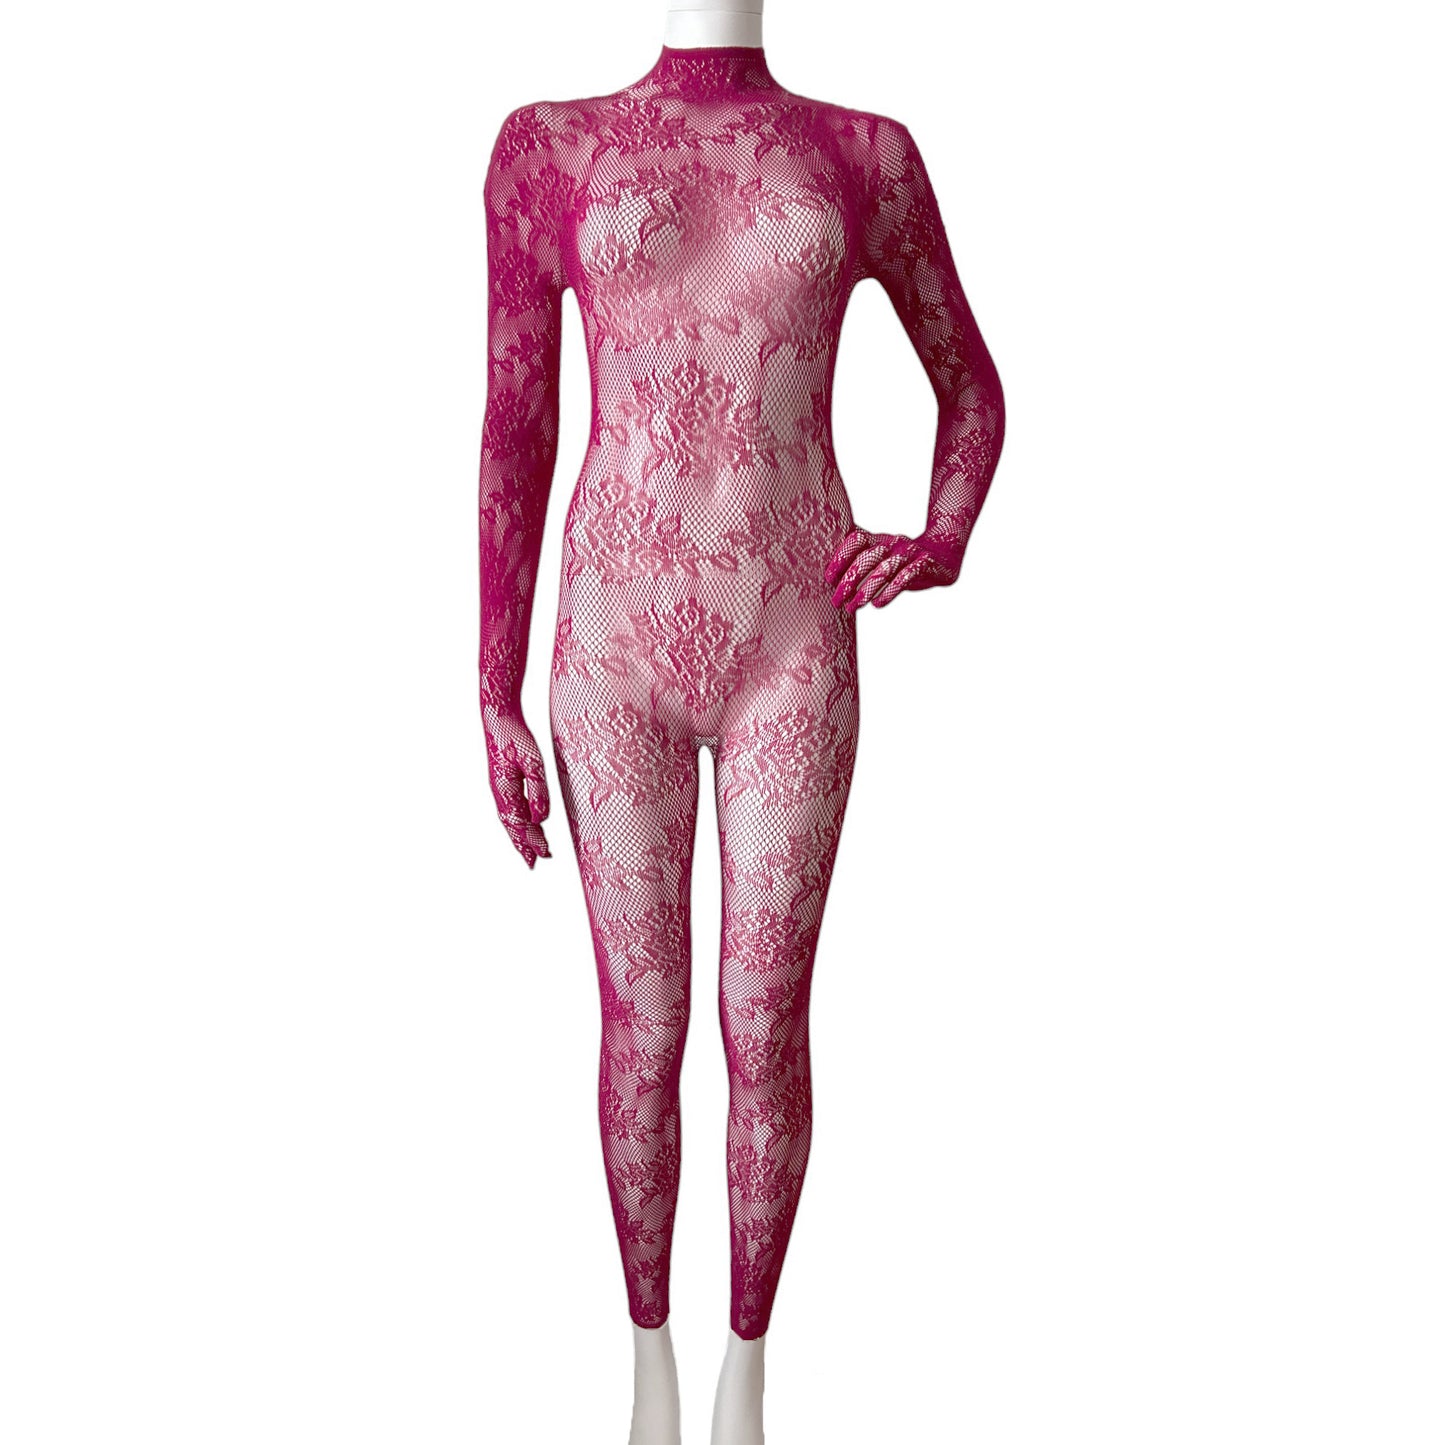 CHLOE Gloved Footless Lace Bodystocking